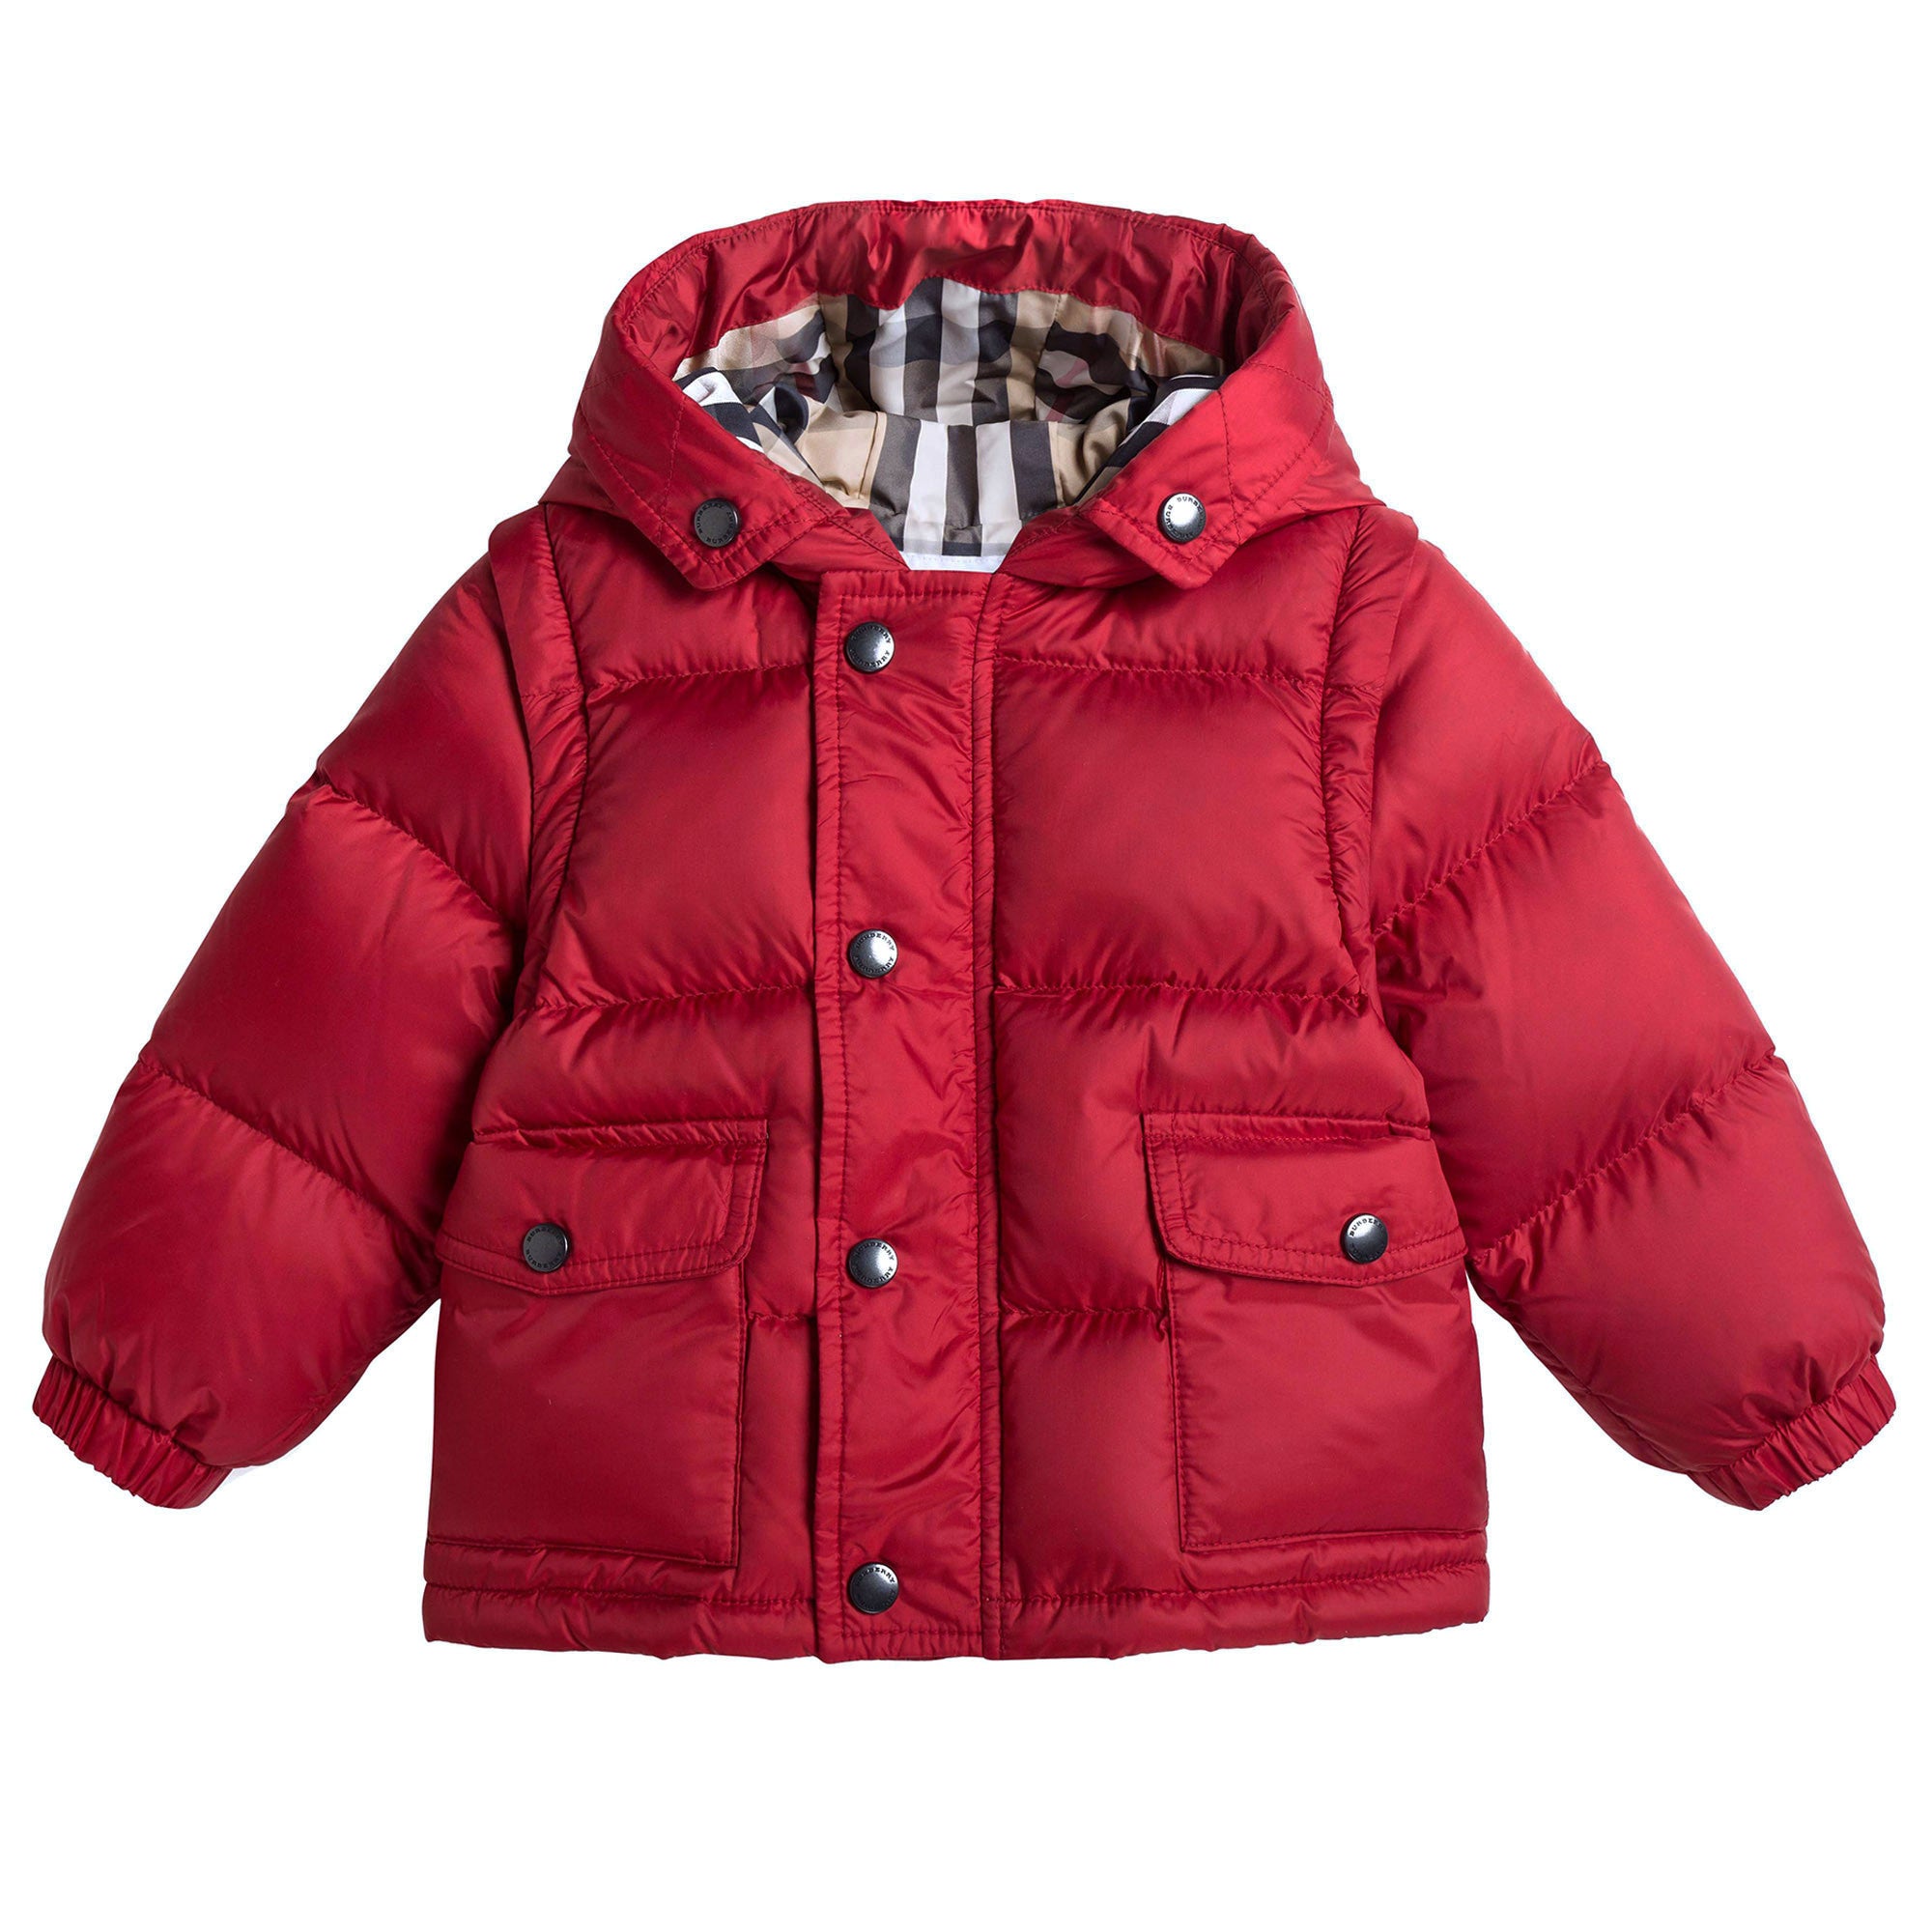 Baby Boys Red Hooded Padded Down Jacket - CÉMAROSE | Children's Fashion Store - 1